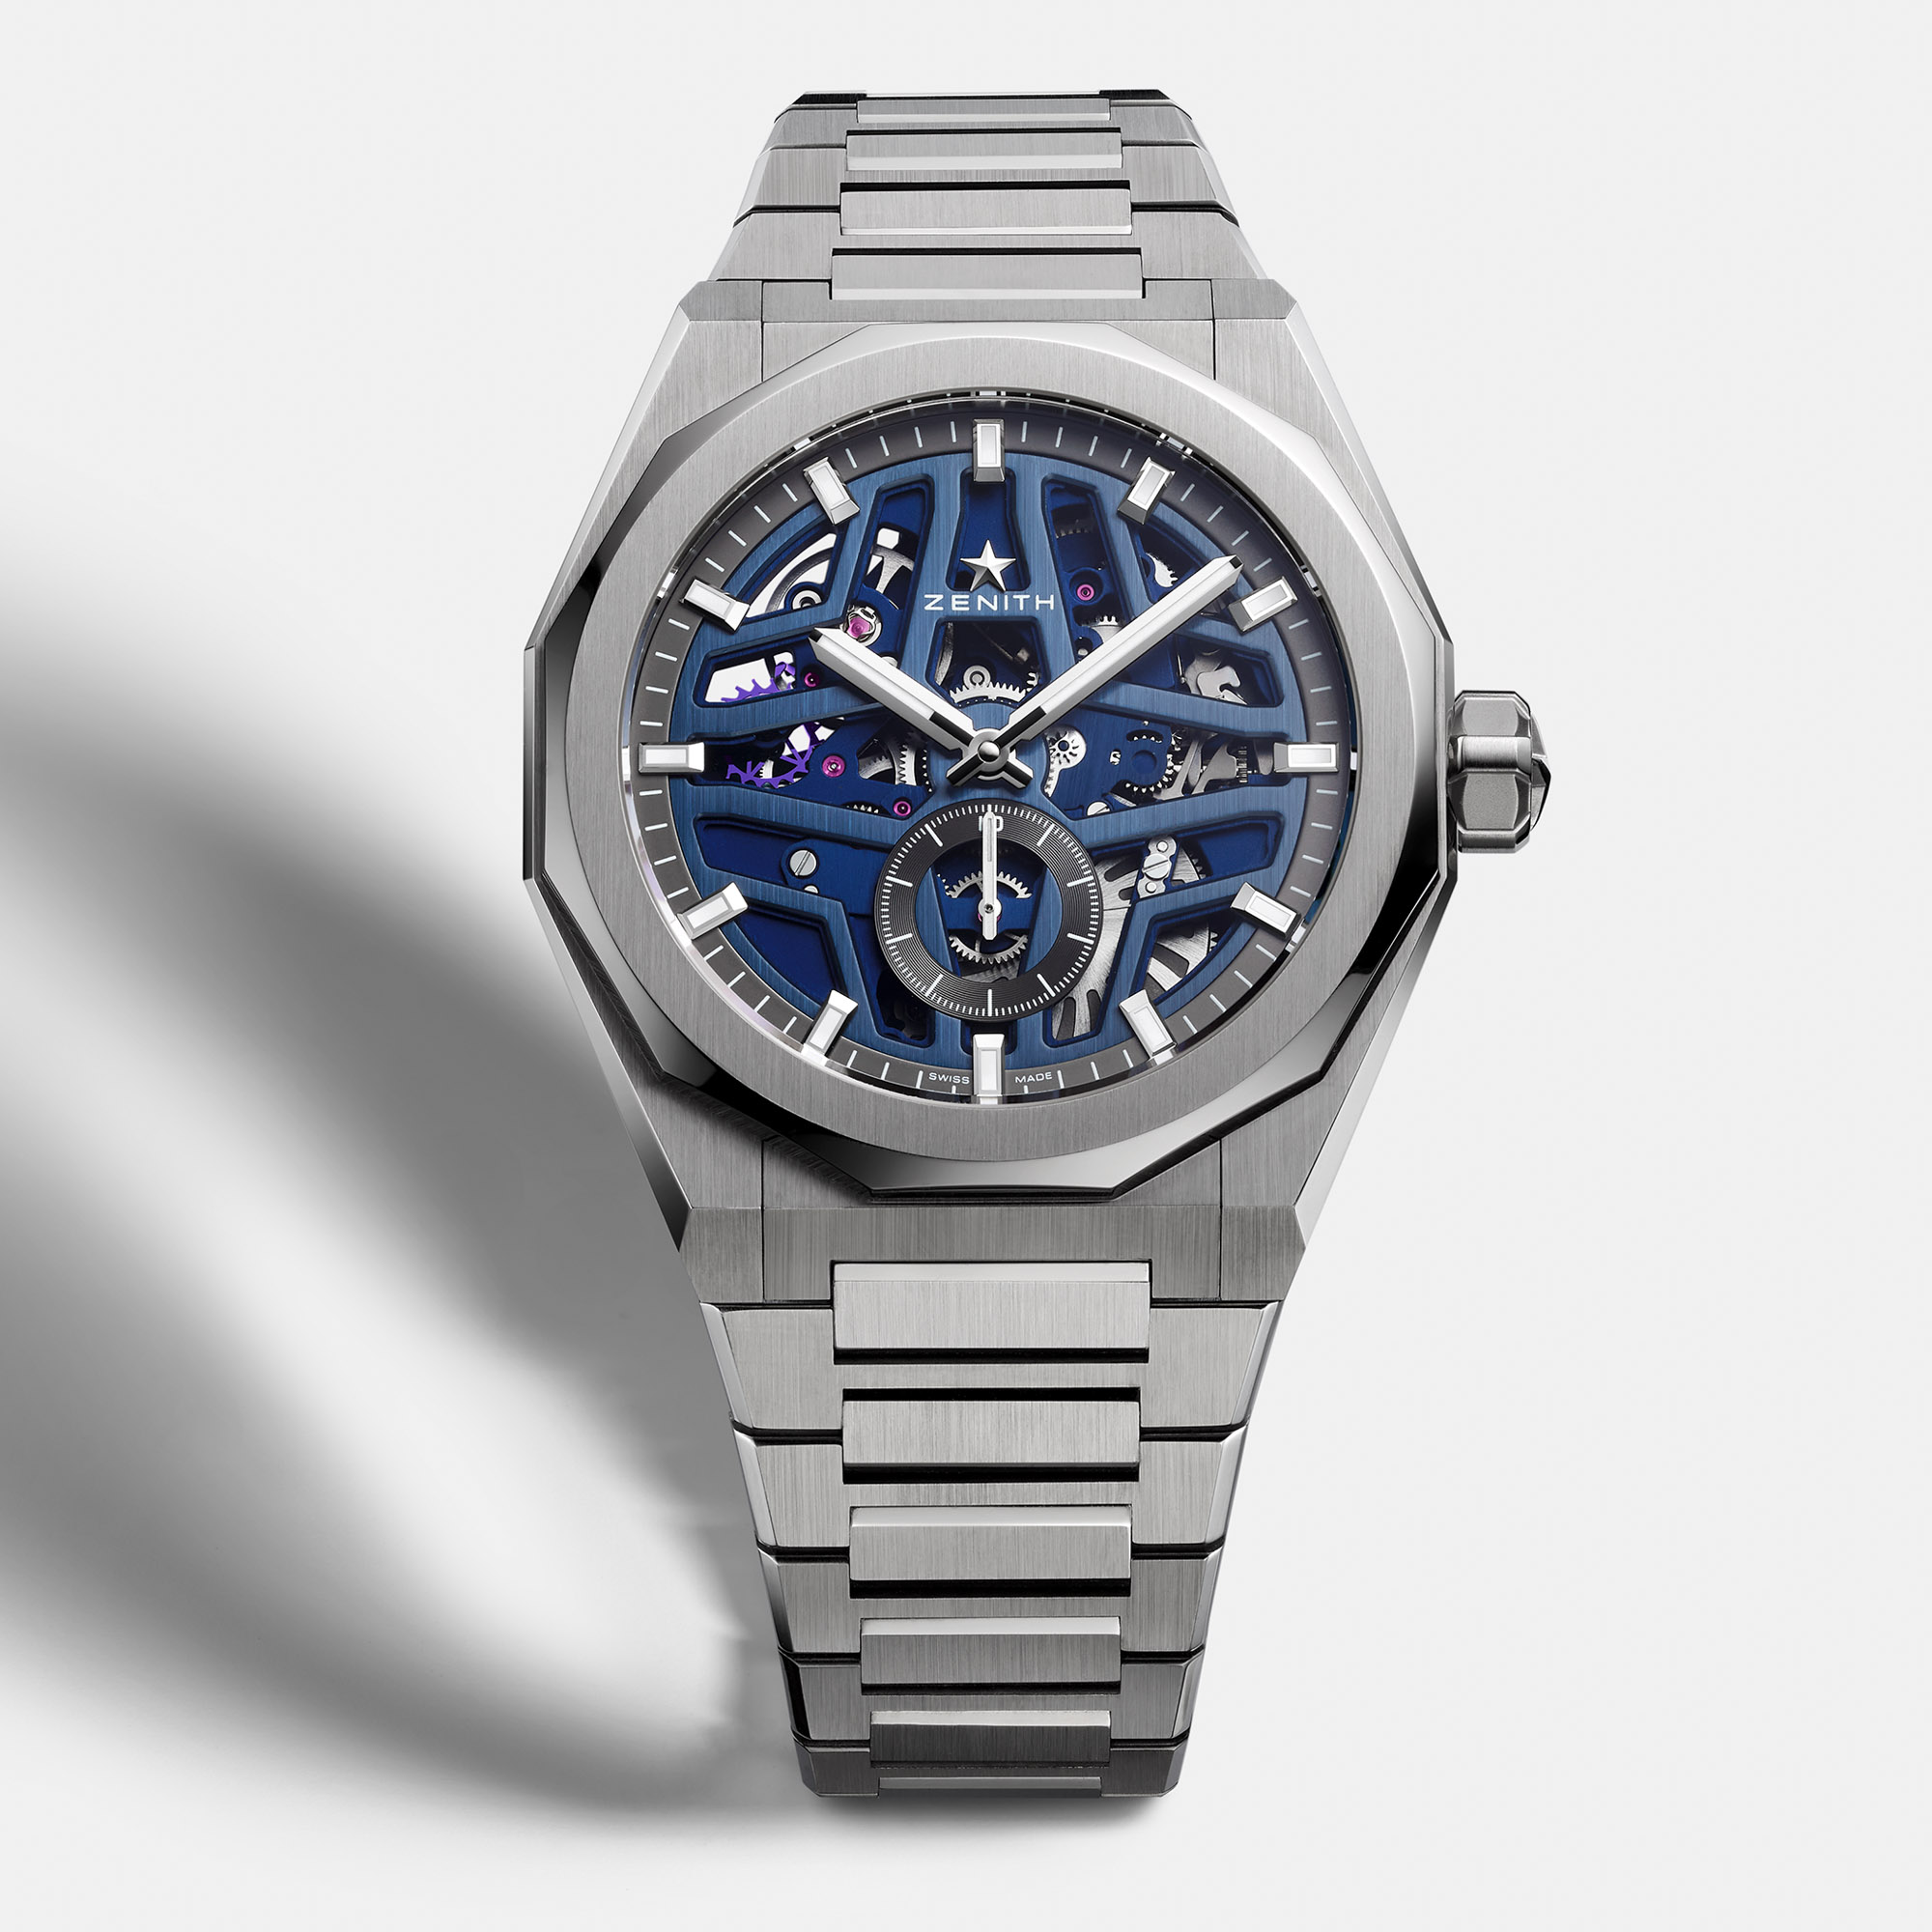 Zenith Watches: Zenith Launches New Defy Skyline Skeleton Boutique Edition  With Touches Of Gleaming Gold - Luxferity